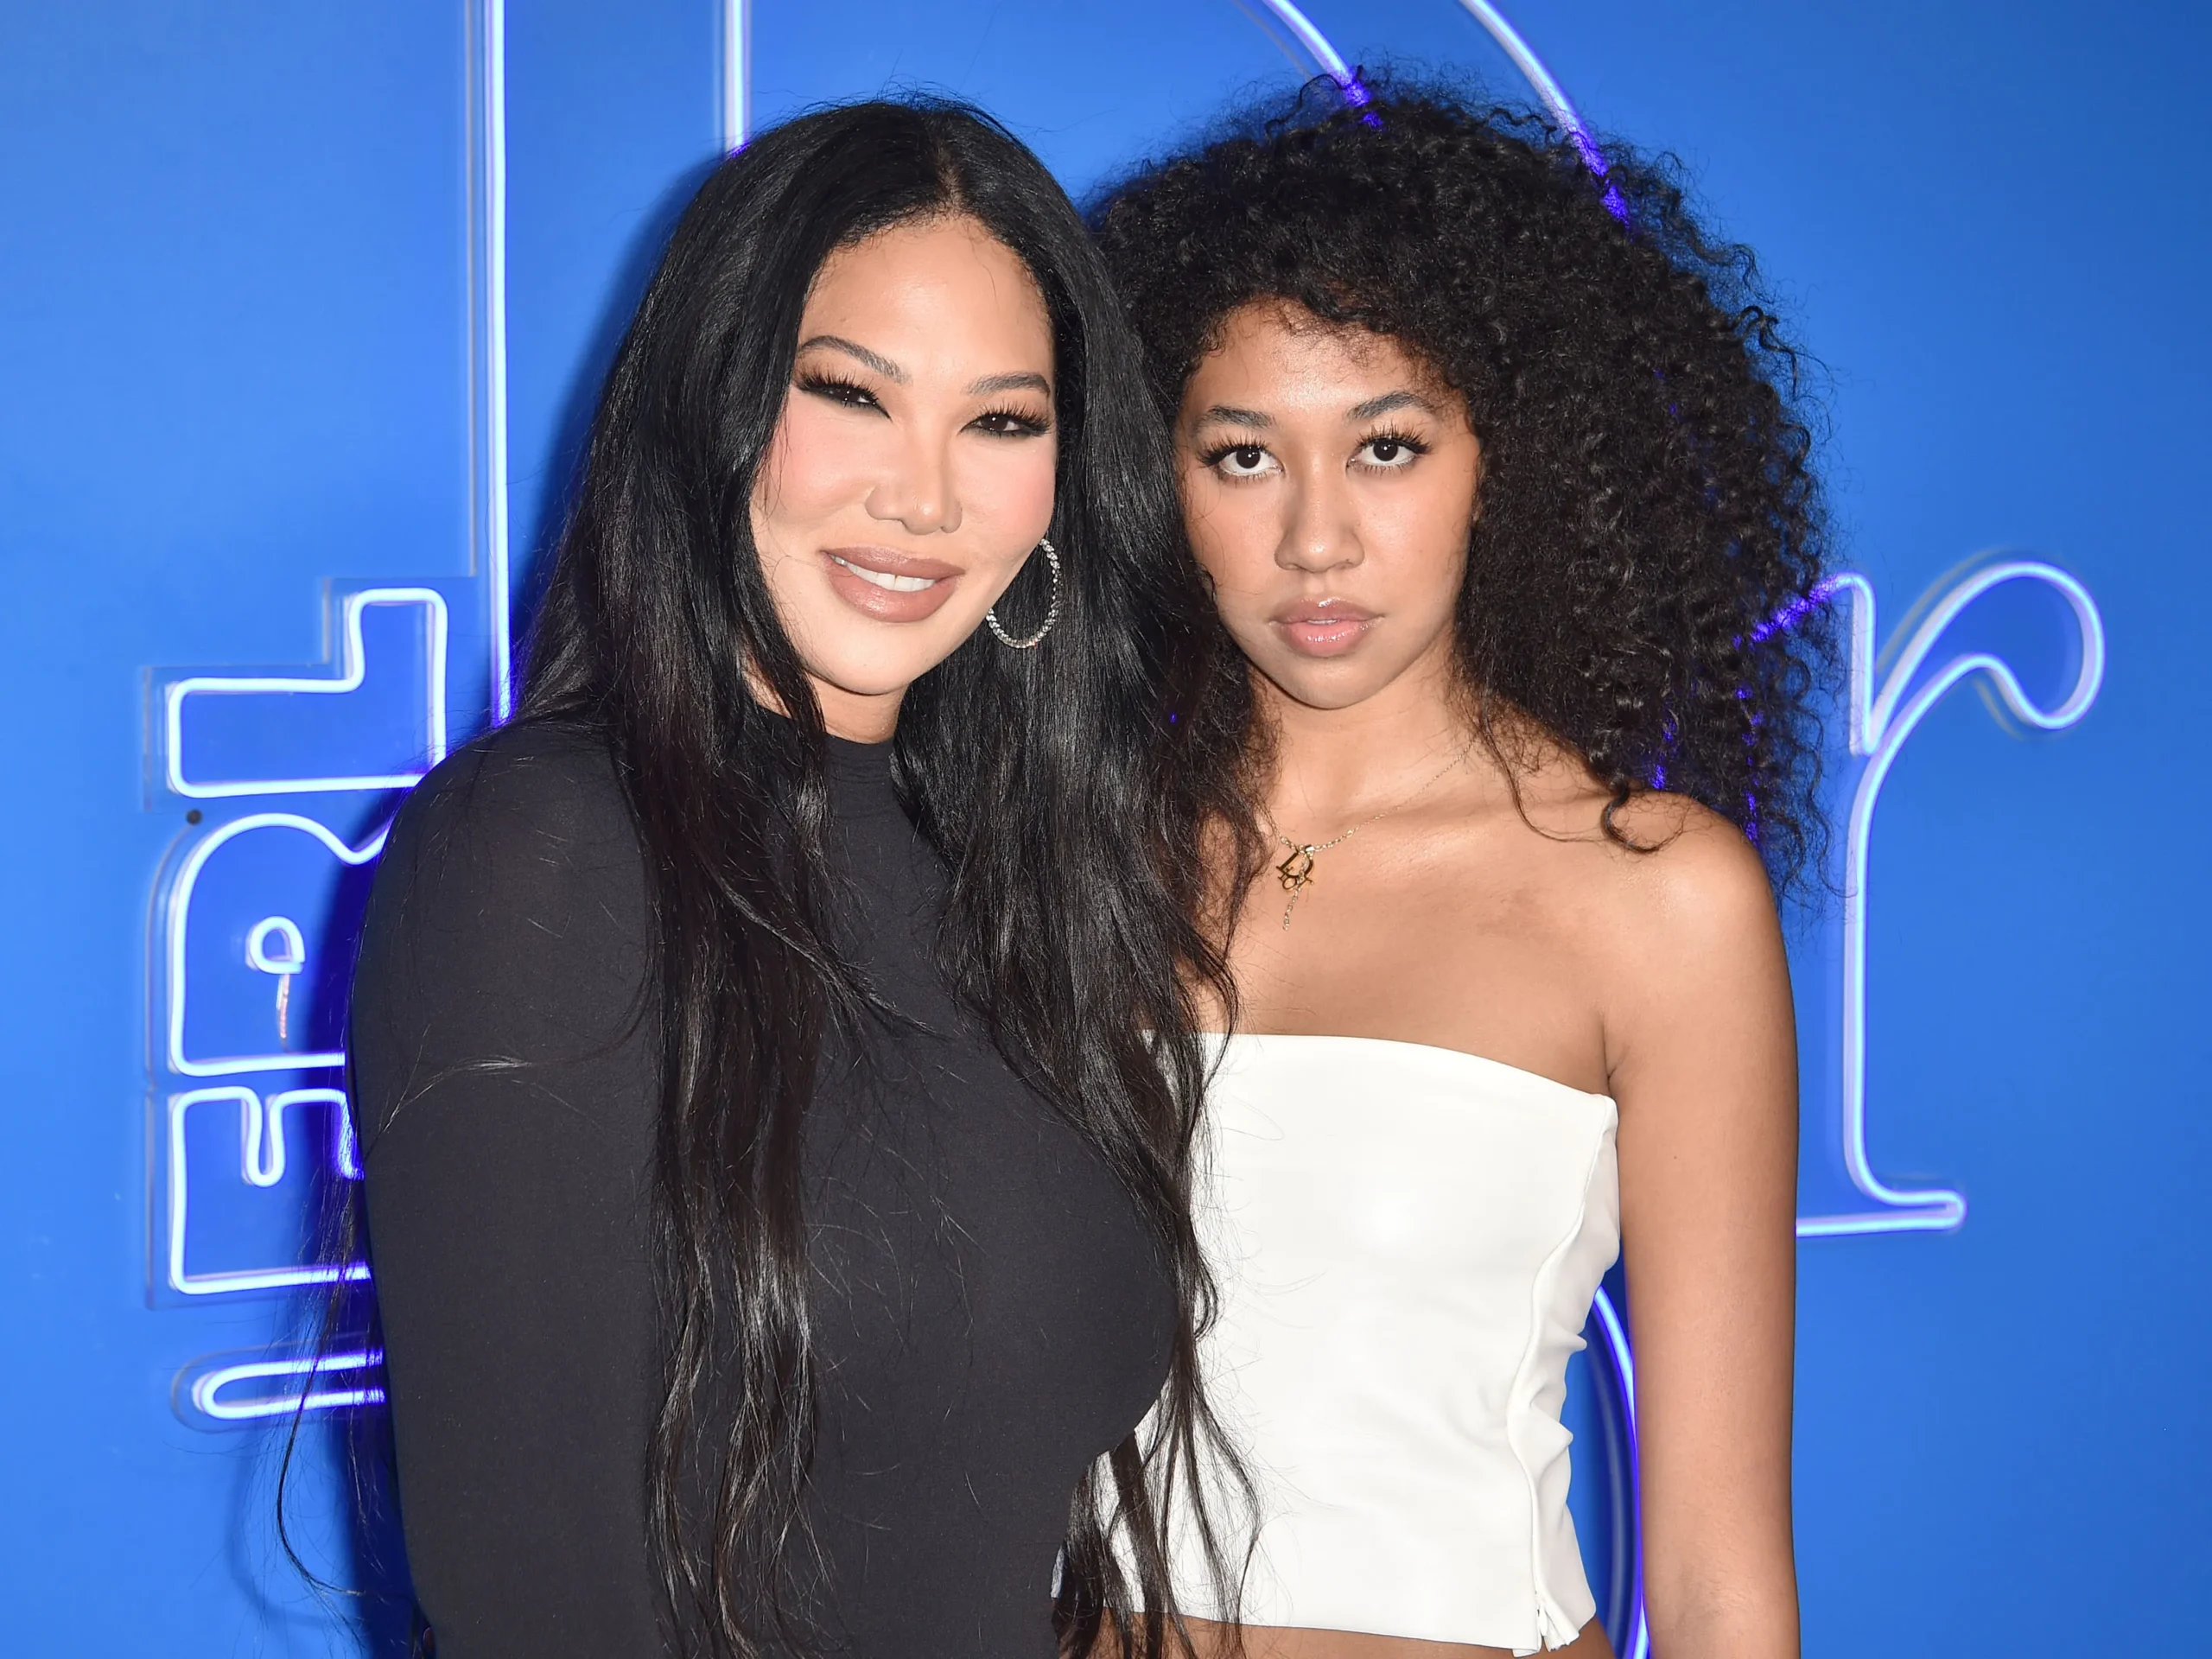 Kimora Lee Simmons Felt a ‘Little Embarrassed’ by Daughter Aoki Making Out With Older Man